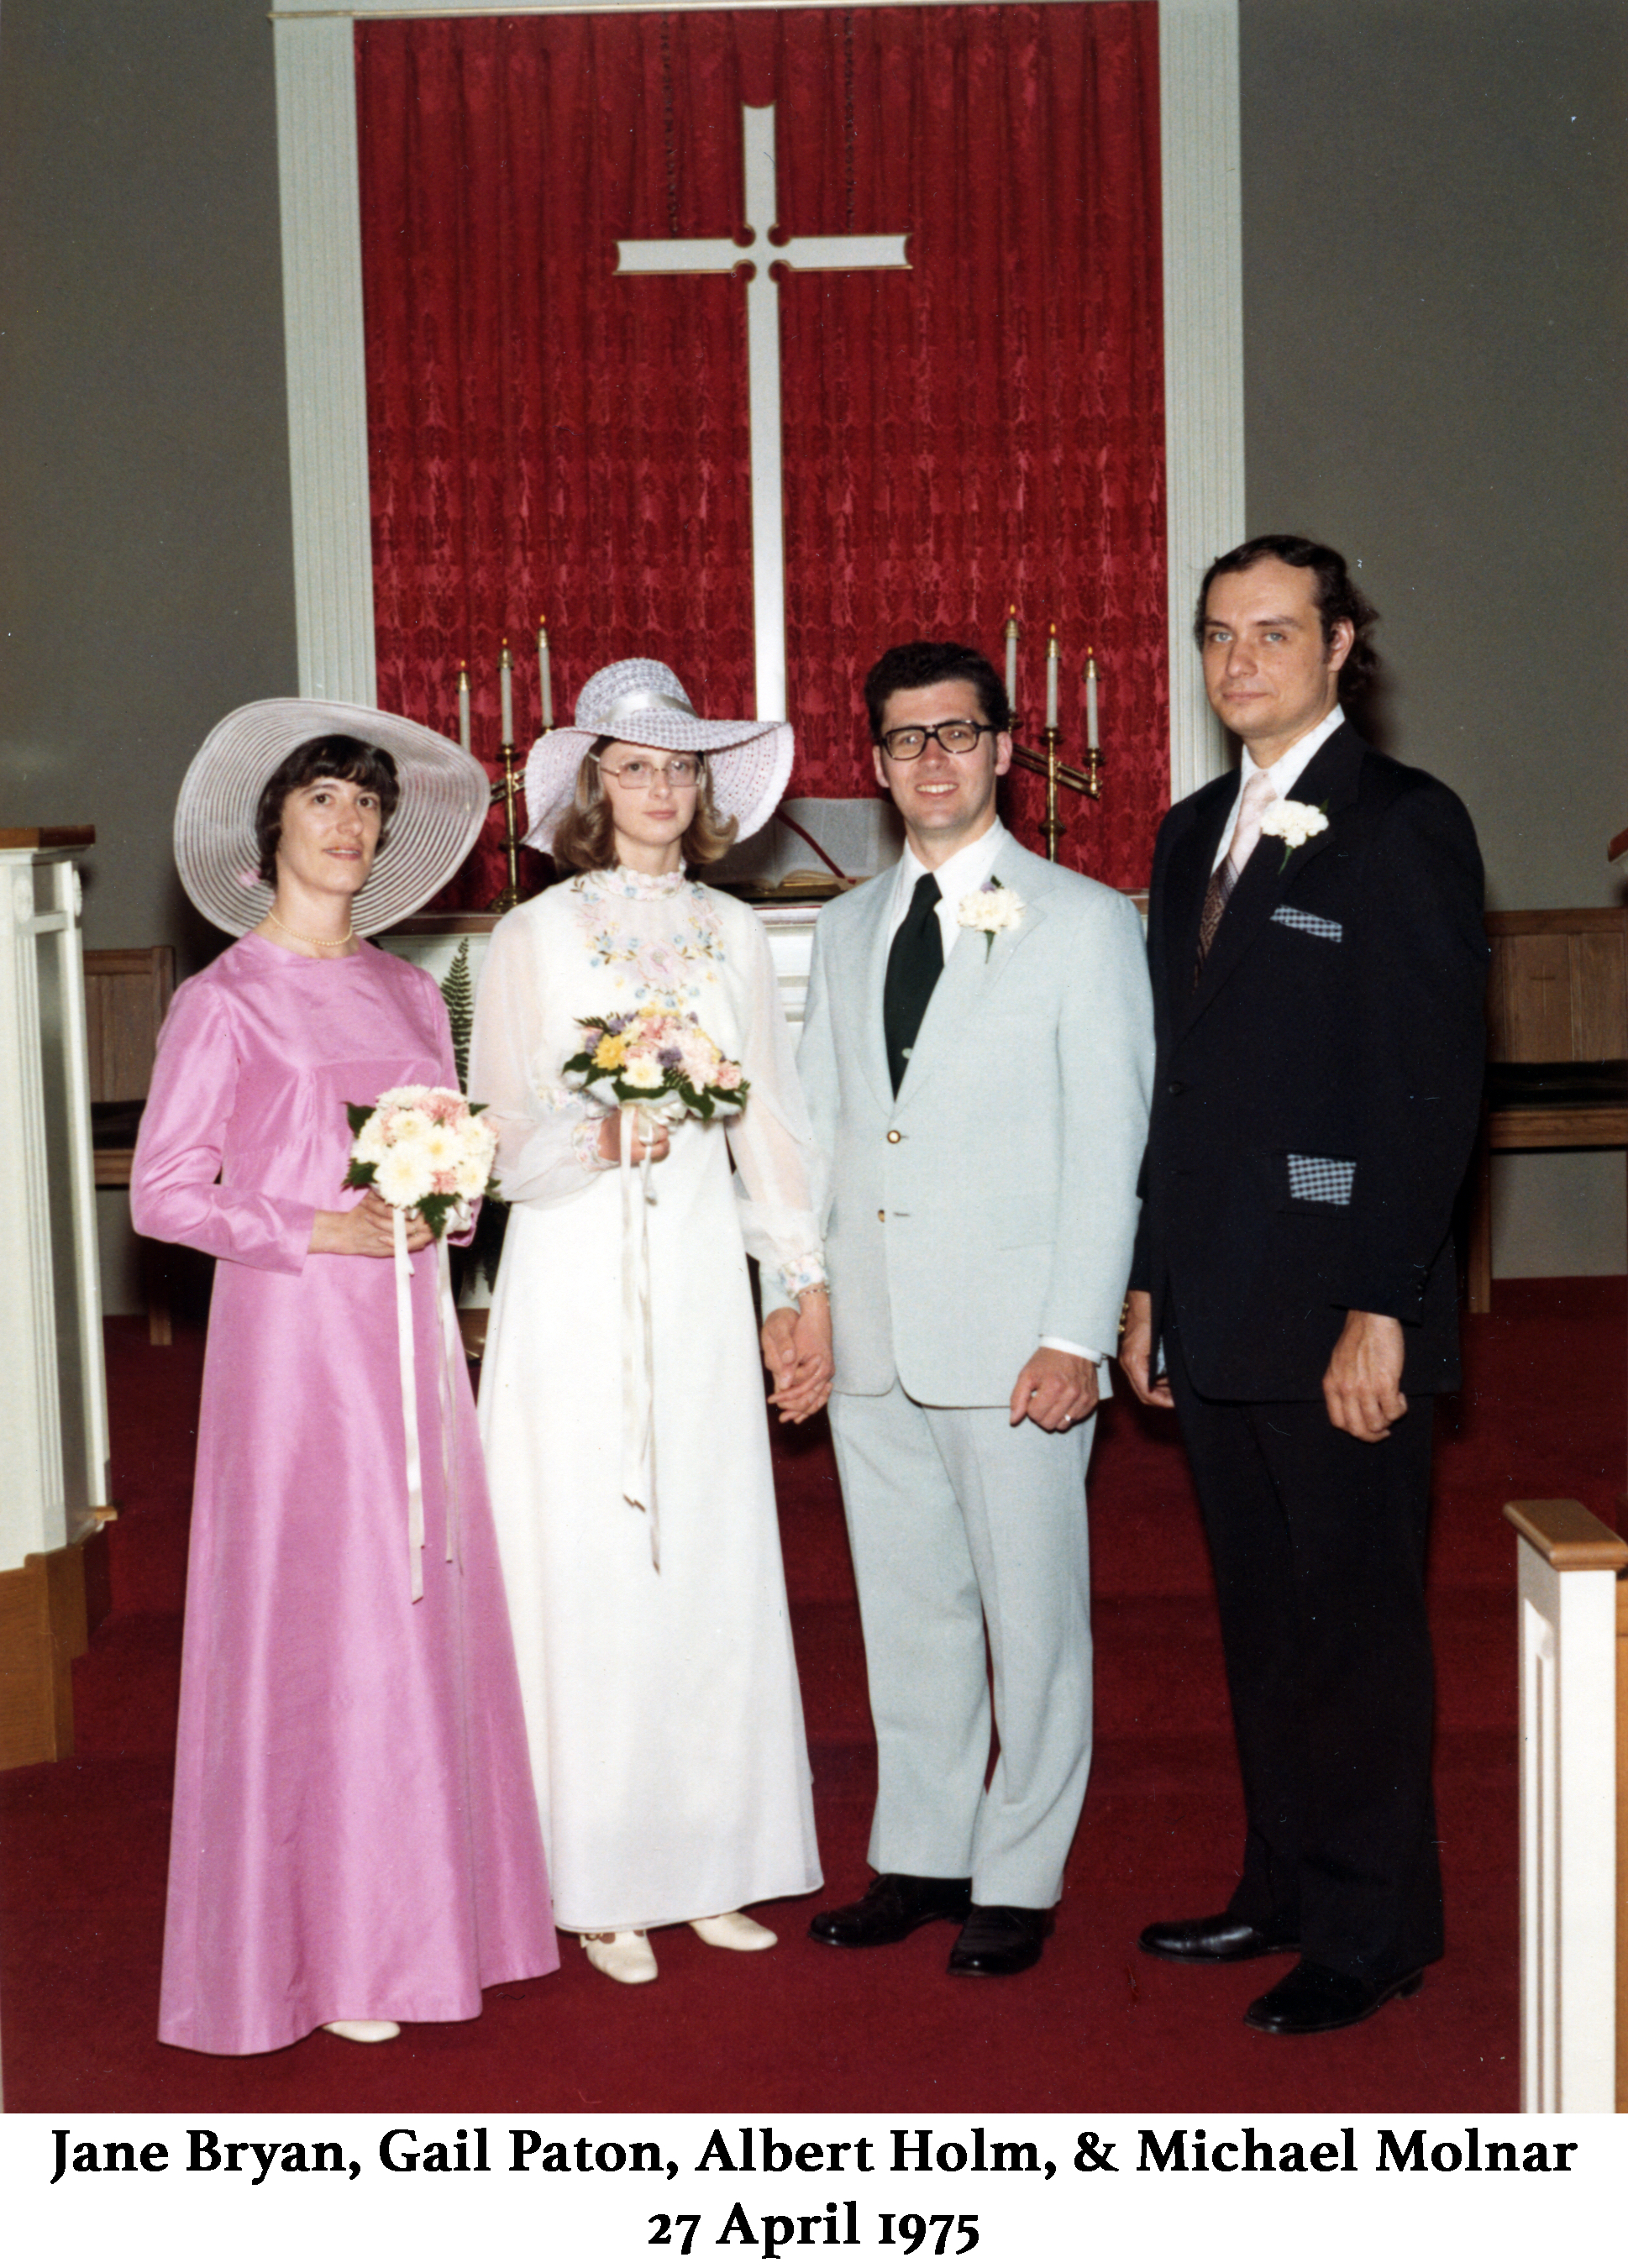 Wedding photo of Gail Paton and Albert Holm standing at the altar, flanked by their attendants